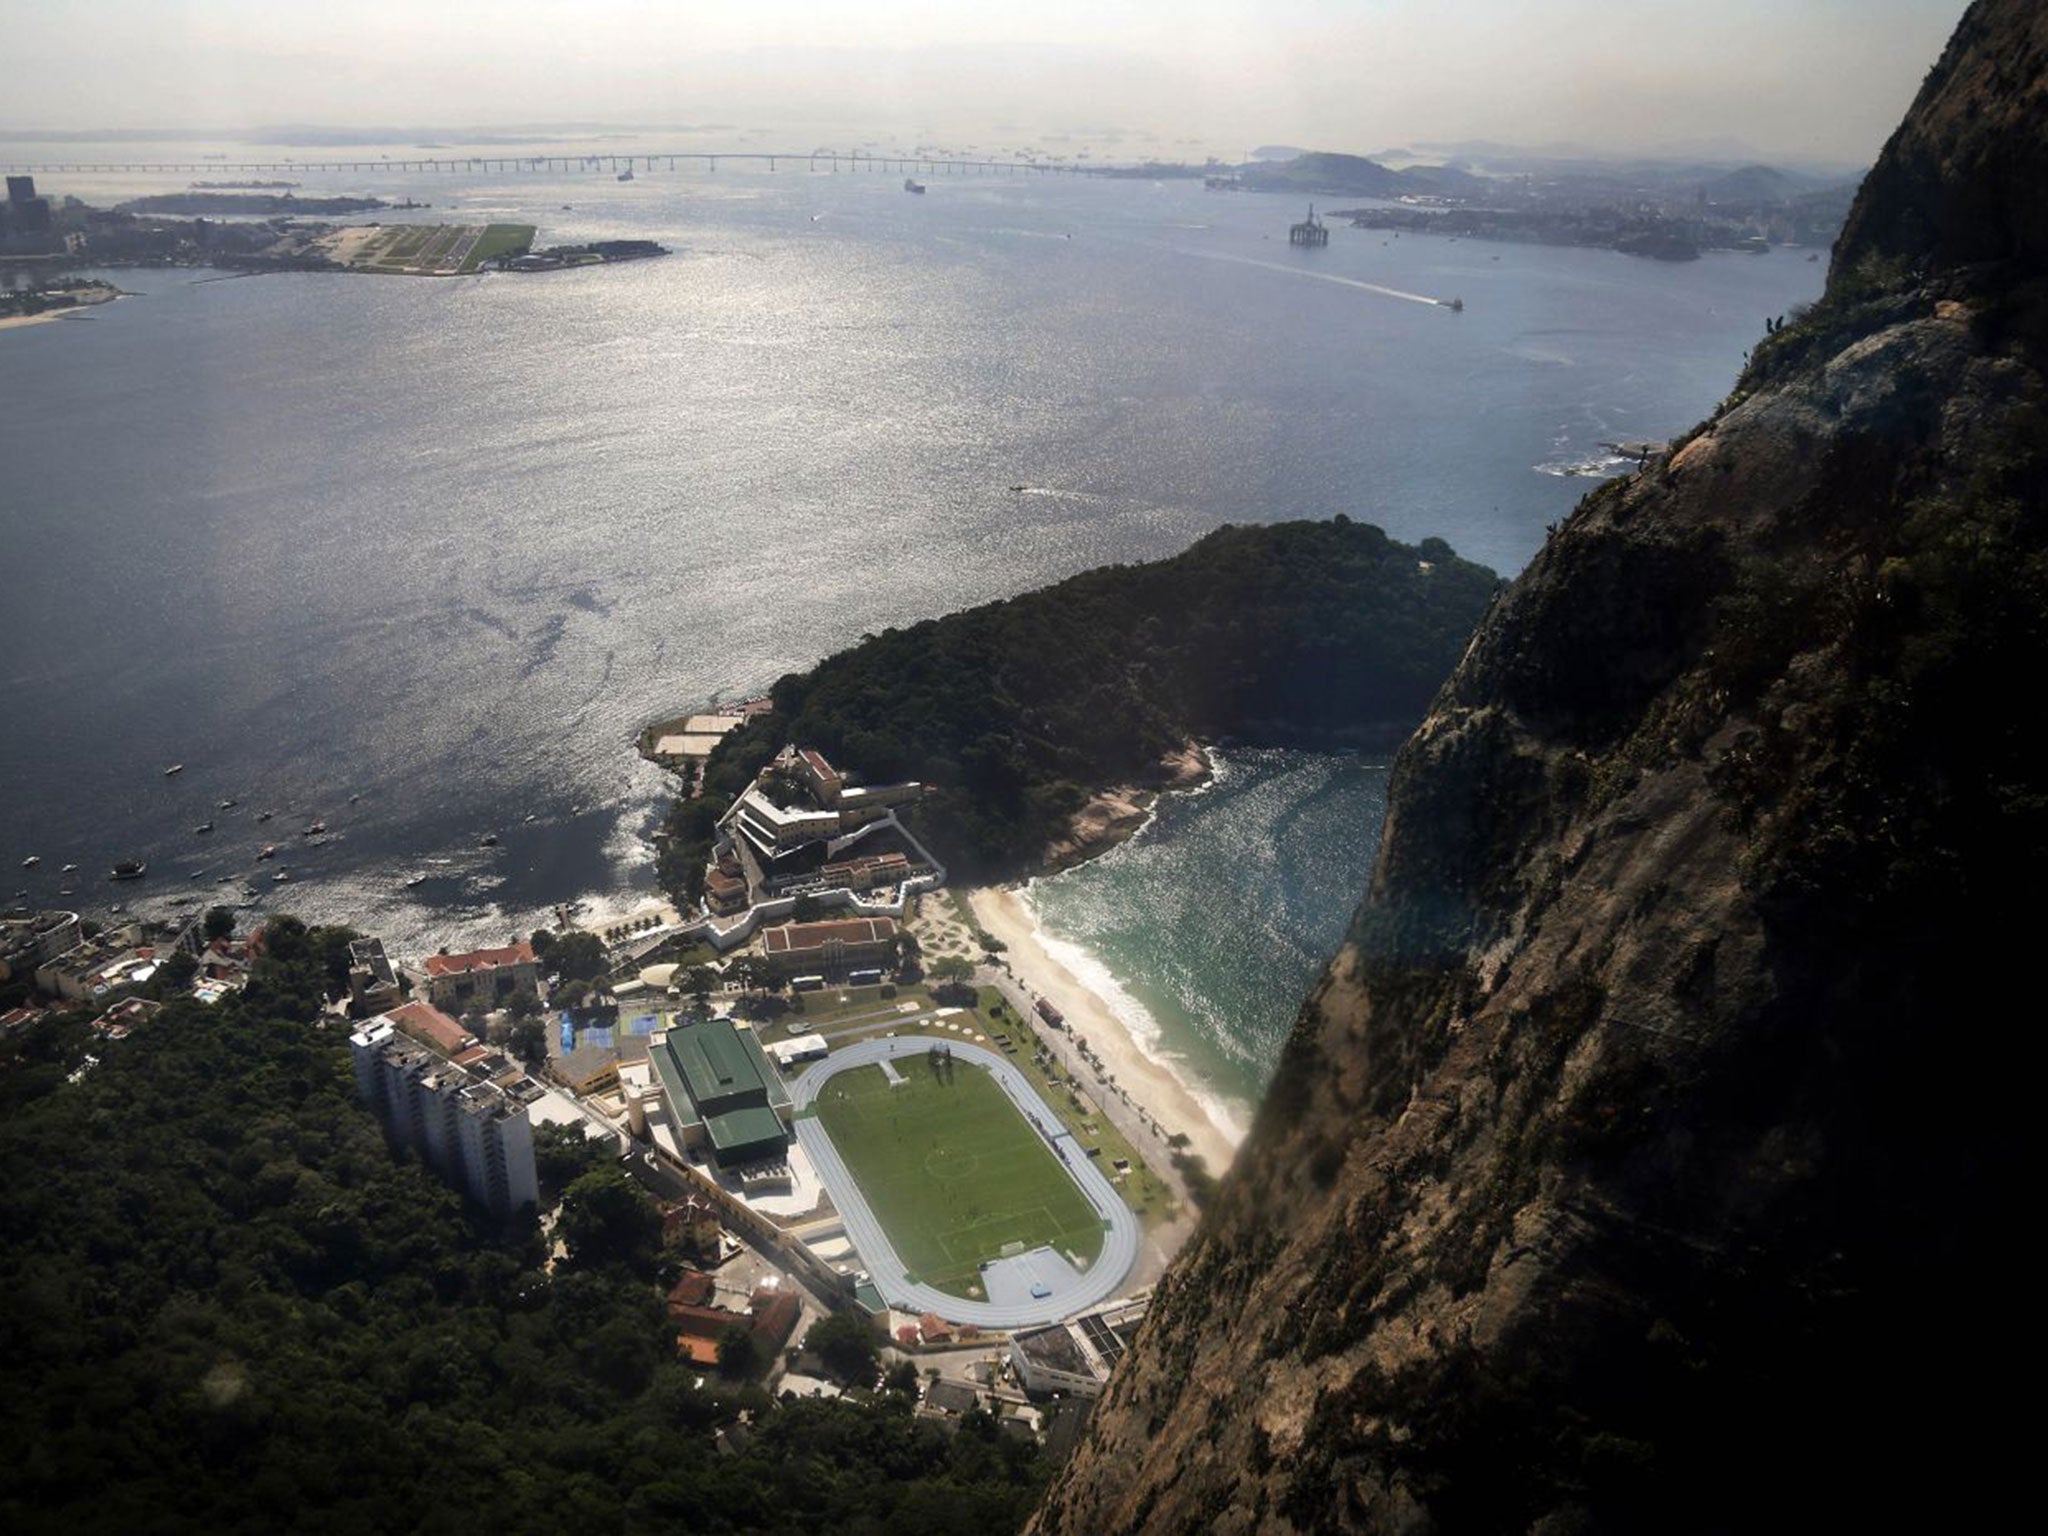 Many of the waters designated for Olympic events were found to contain super bacteria 